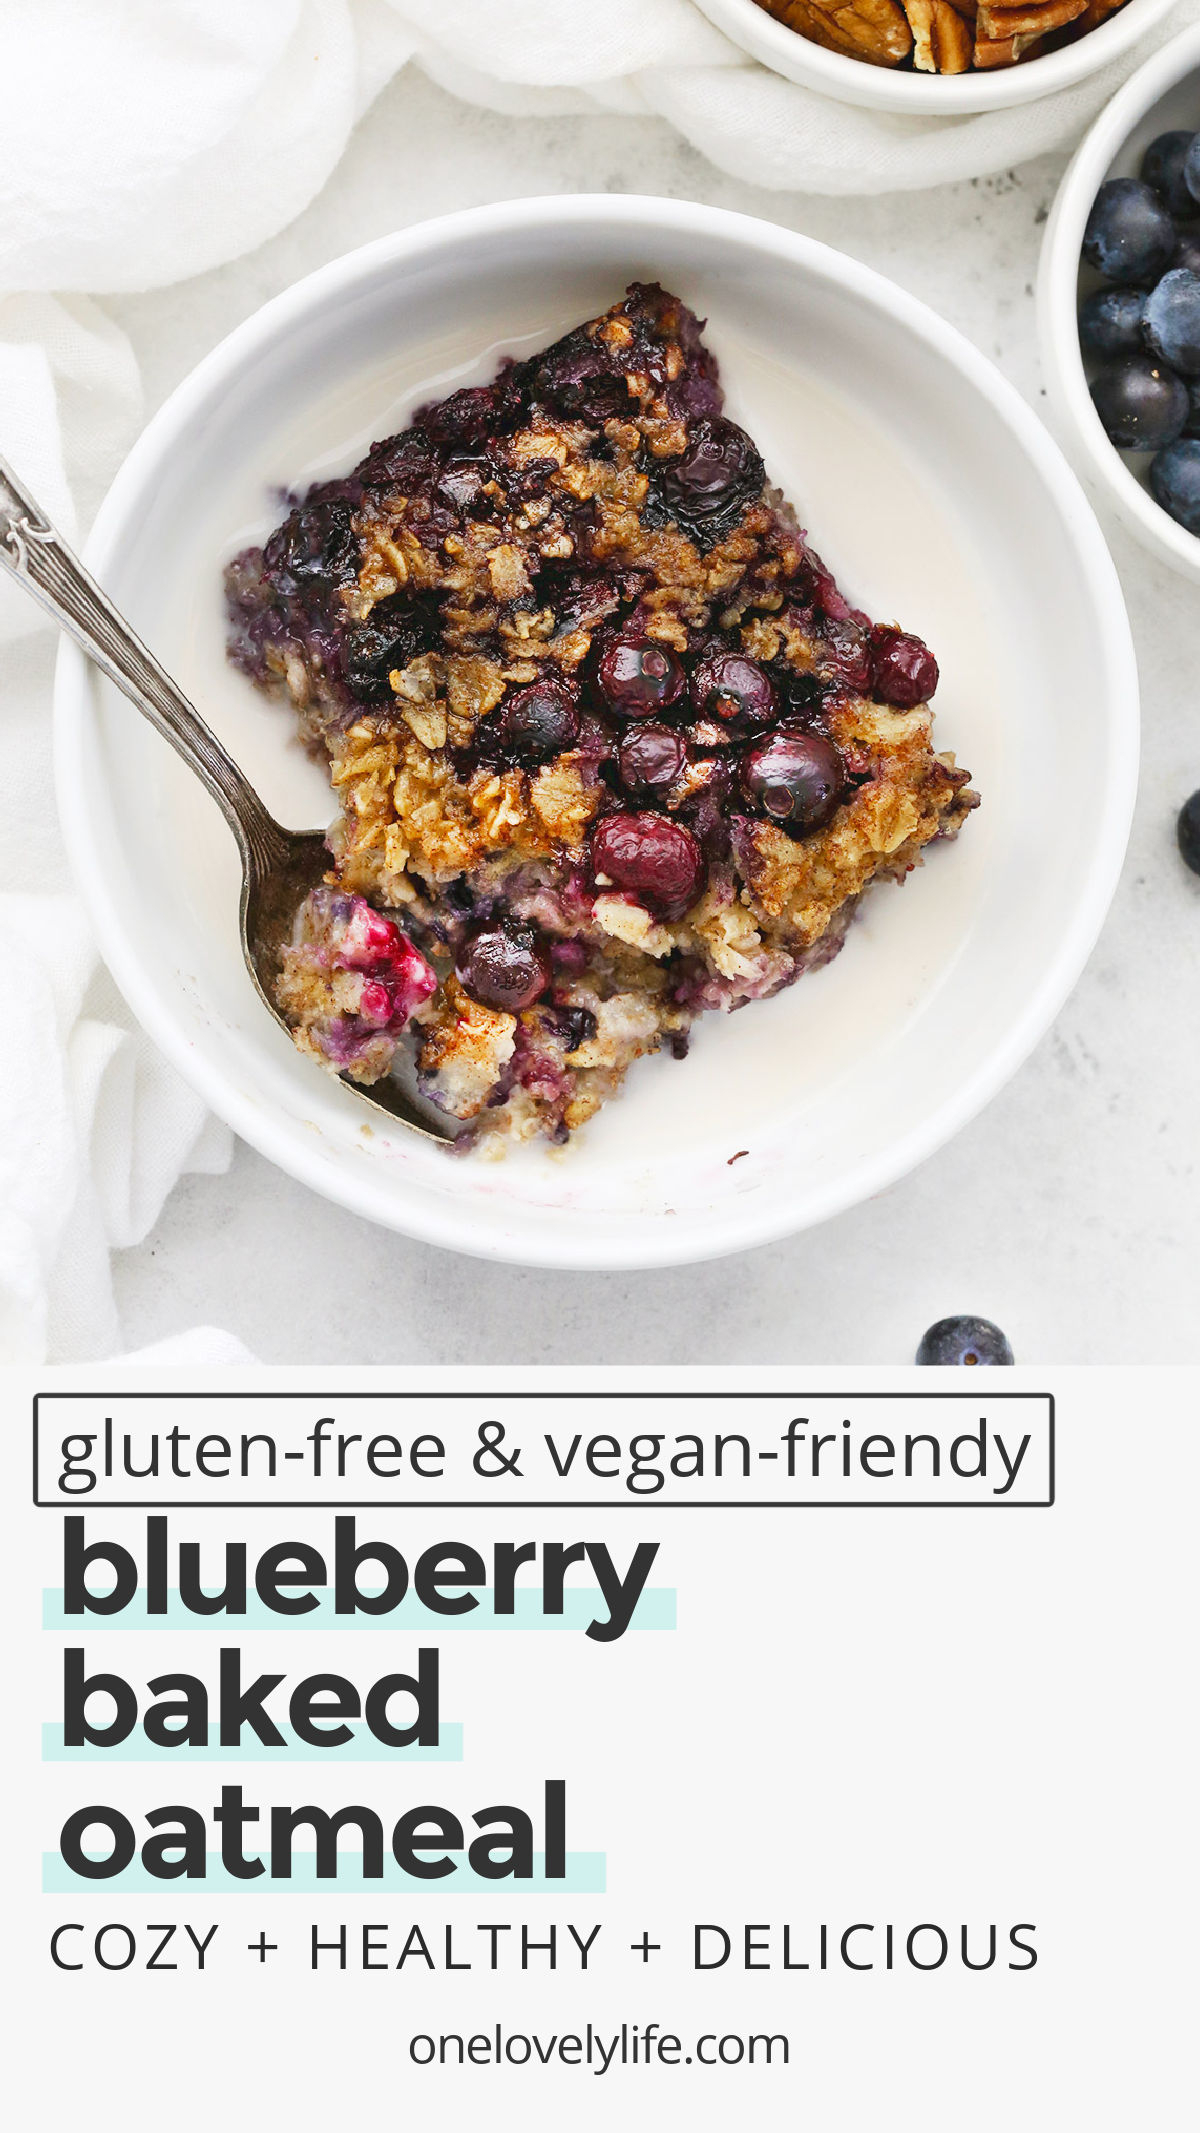 Baked Blueberry Oatmeal - Cozy baked oatmeal with plenty of blueberries and warm spices. This baked oatmeal recipe is perfect for meal-prep, lazy weekends, and feeding a crowd! // Baked Blueberry Oatmeal // Baked oatmeal recipe // meal prep breakfast // blueberry oatmeal // blueberry oatmeal bake // vegan breakfast // healthy breakfast // gluten free breakfast //